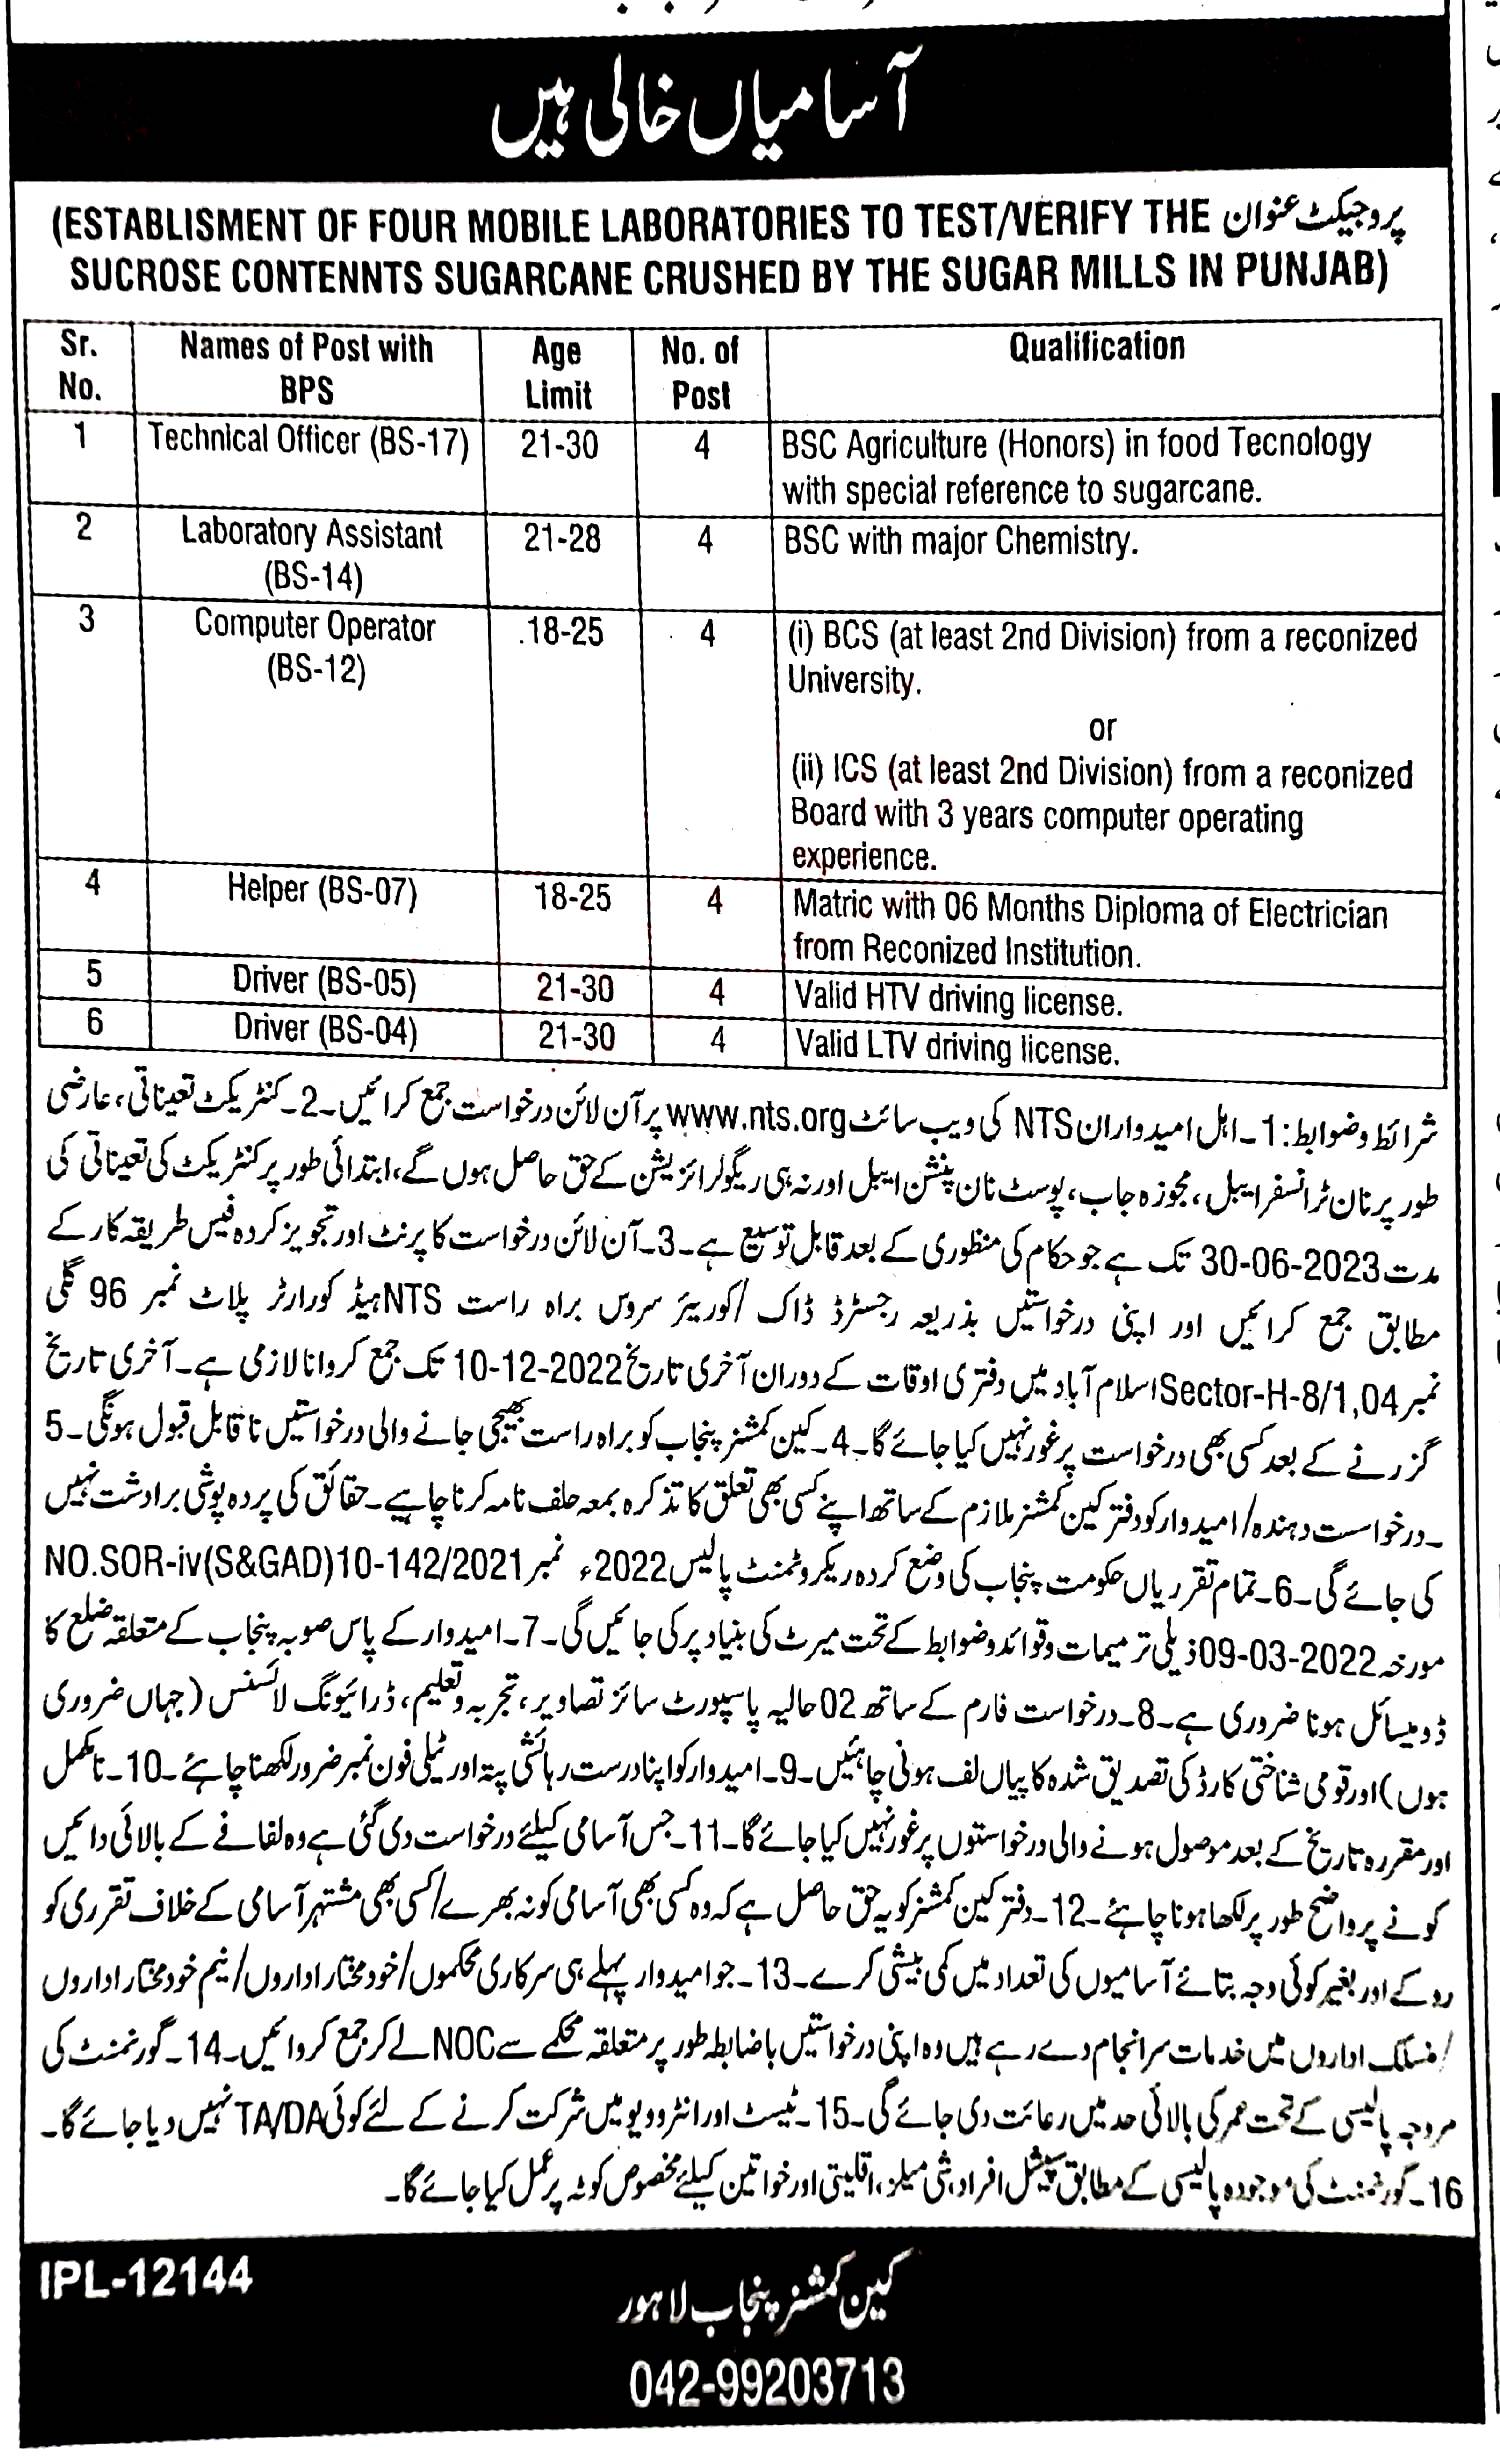 Office of the Cane Commissioner Punjab Jobs 2022